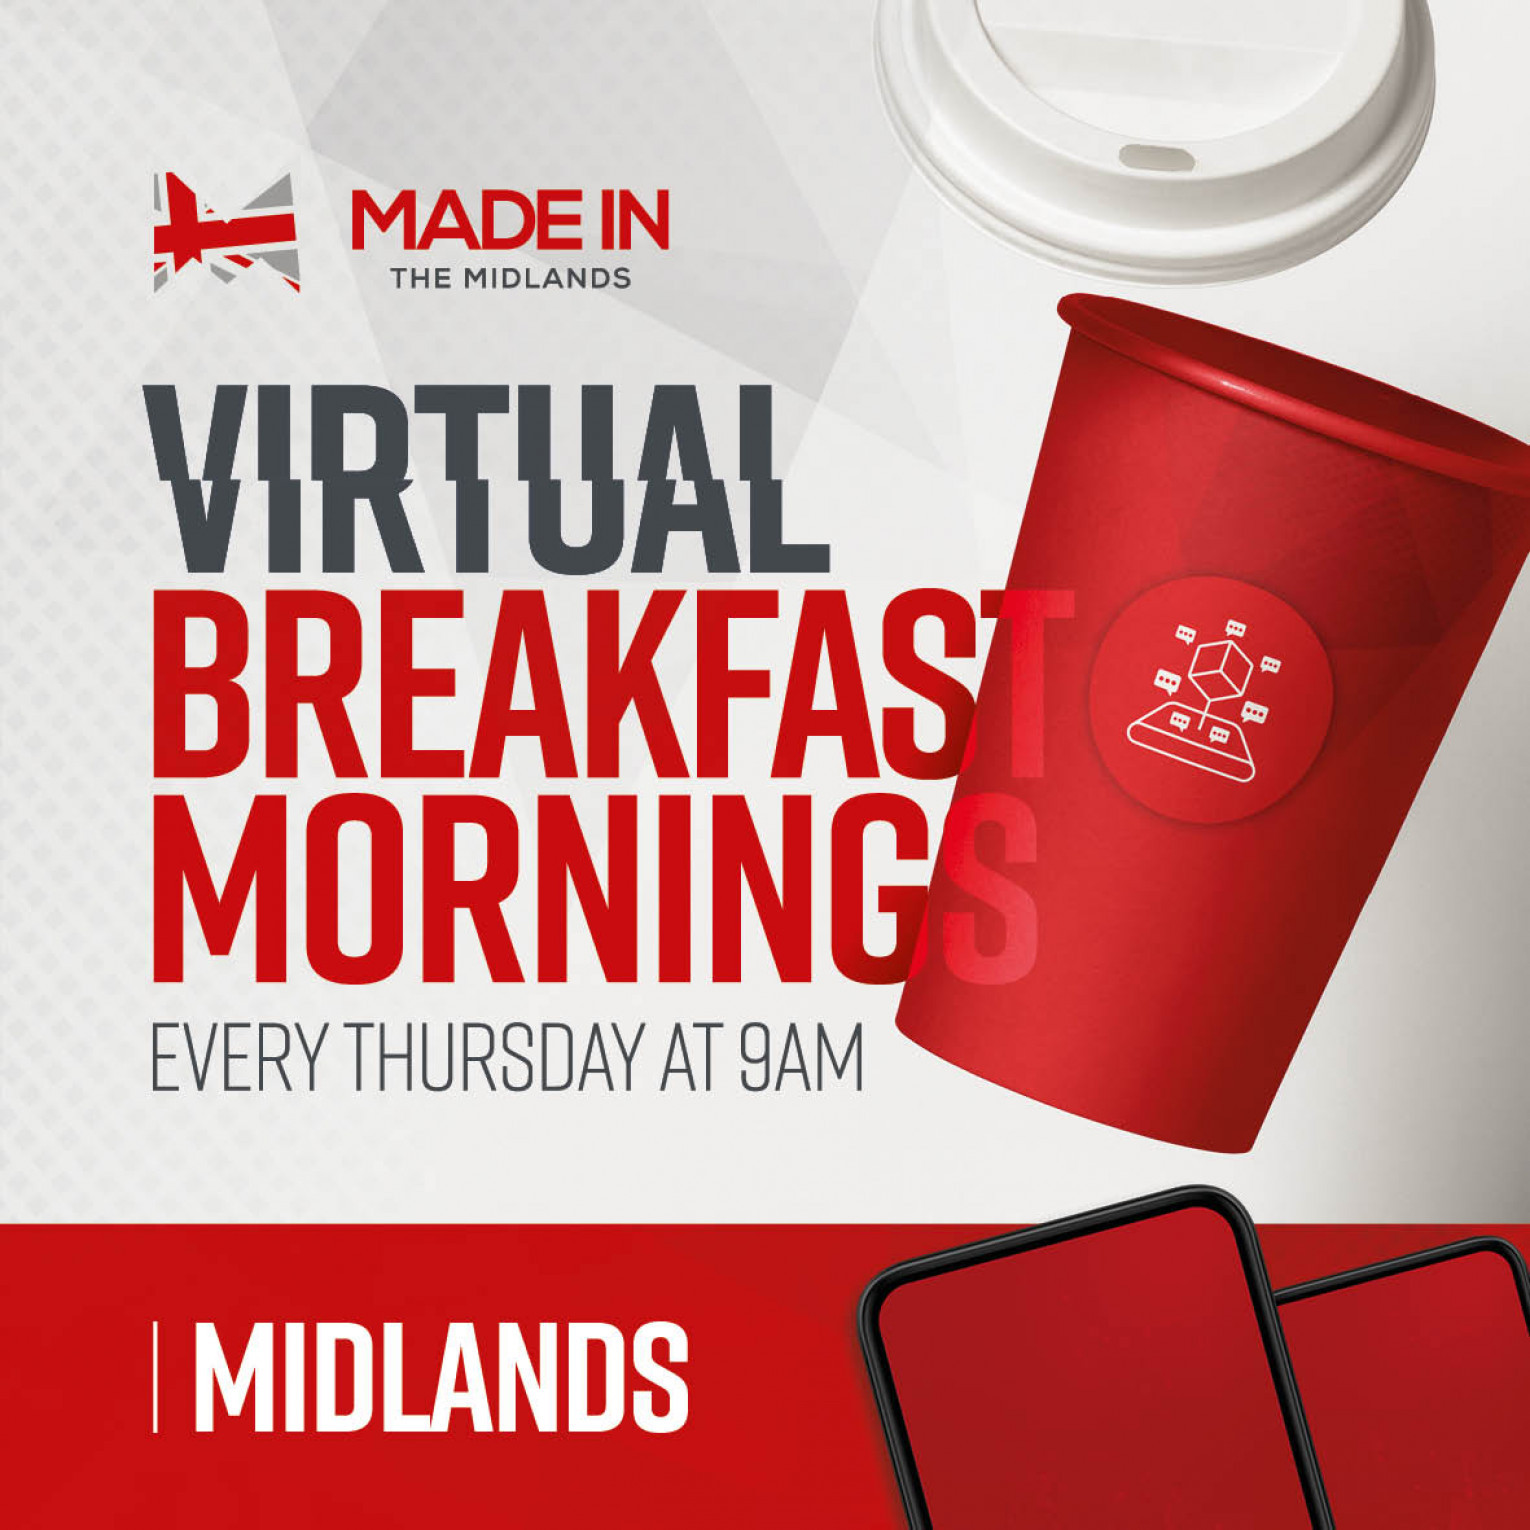 Made In The Midlands Virtual Breakfast Morning with RICOH